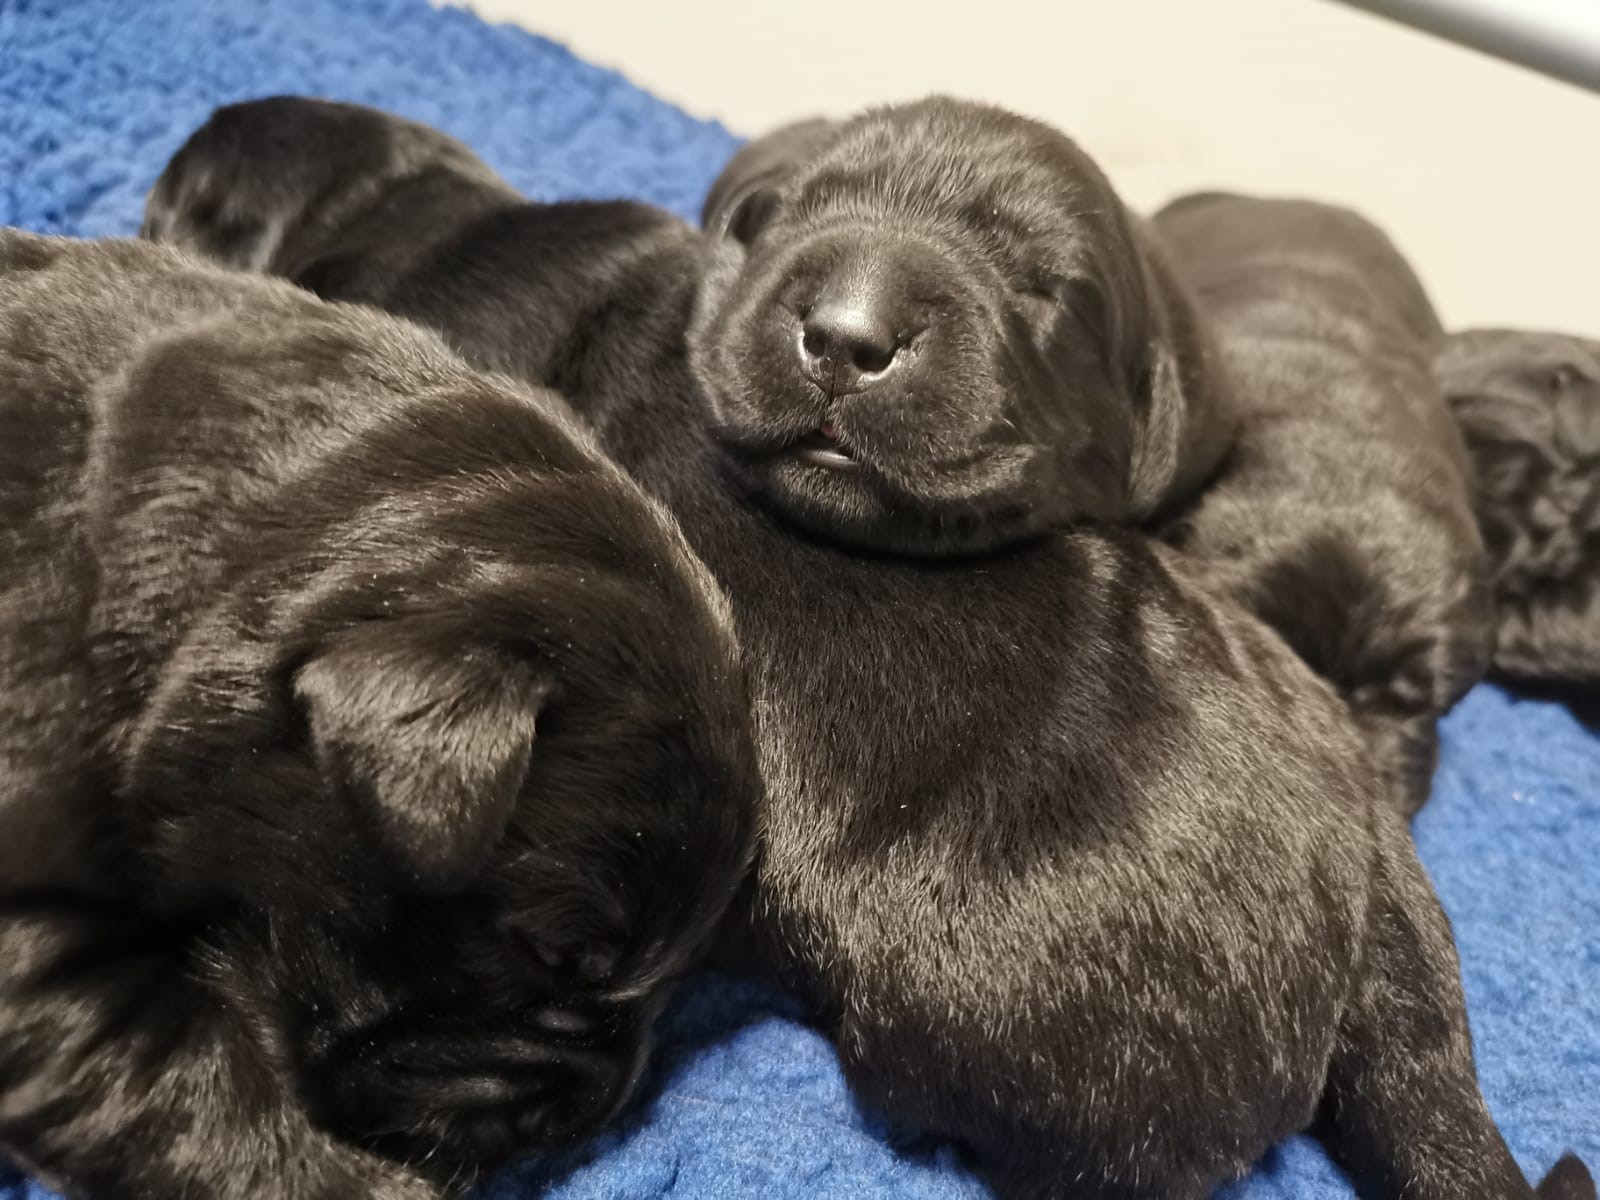 Several black pups sleeping together while one smiles